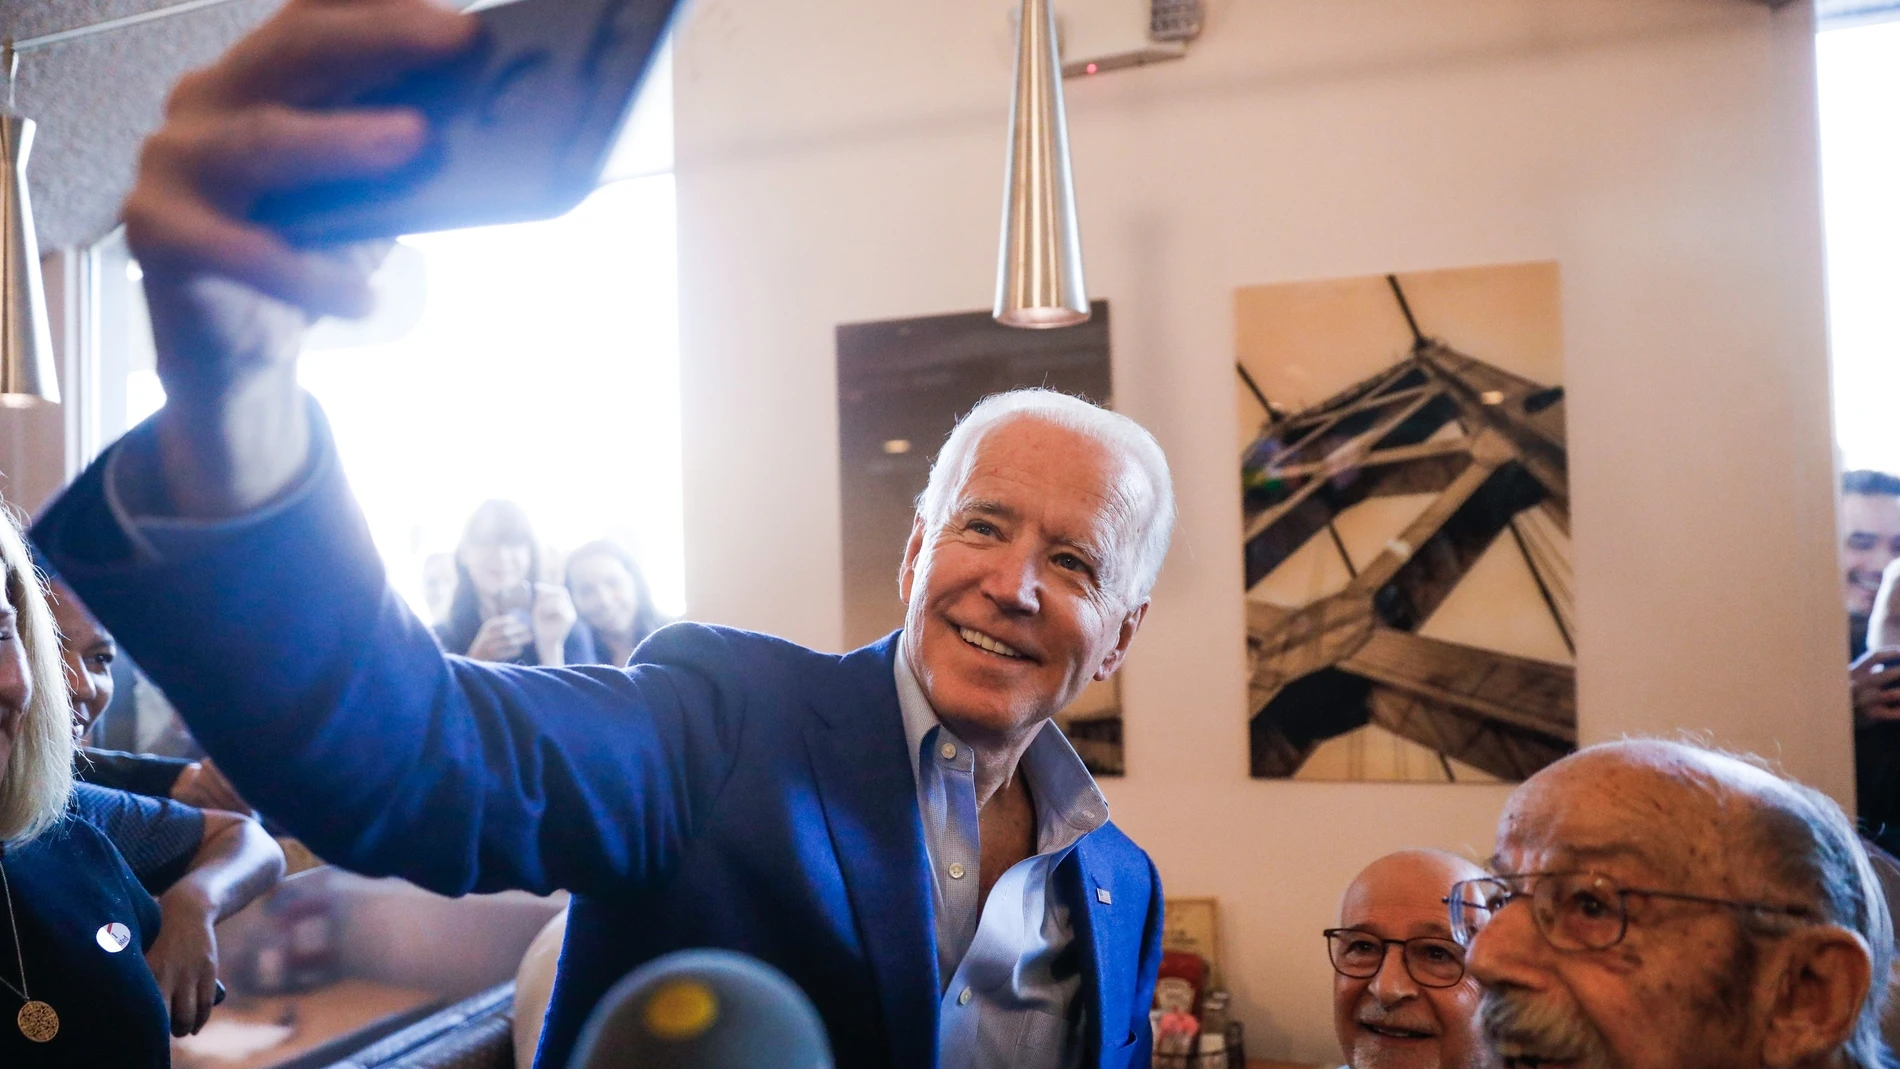 Biden campaigns in Oakland on Super Tuesday